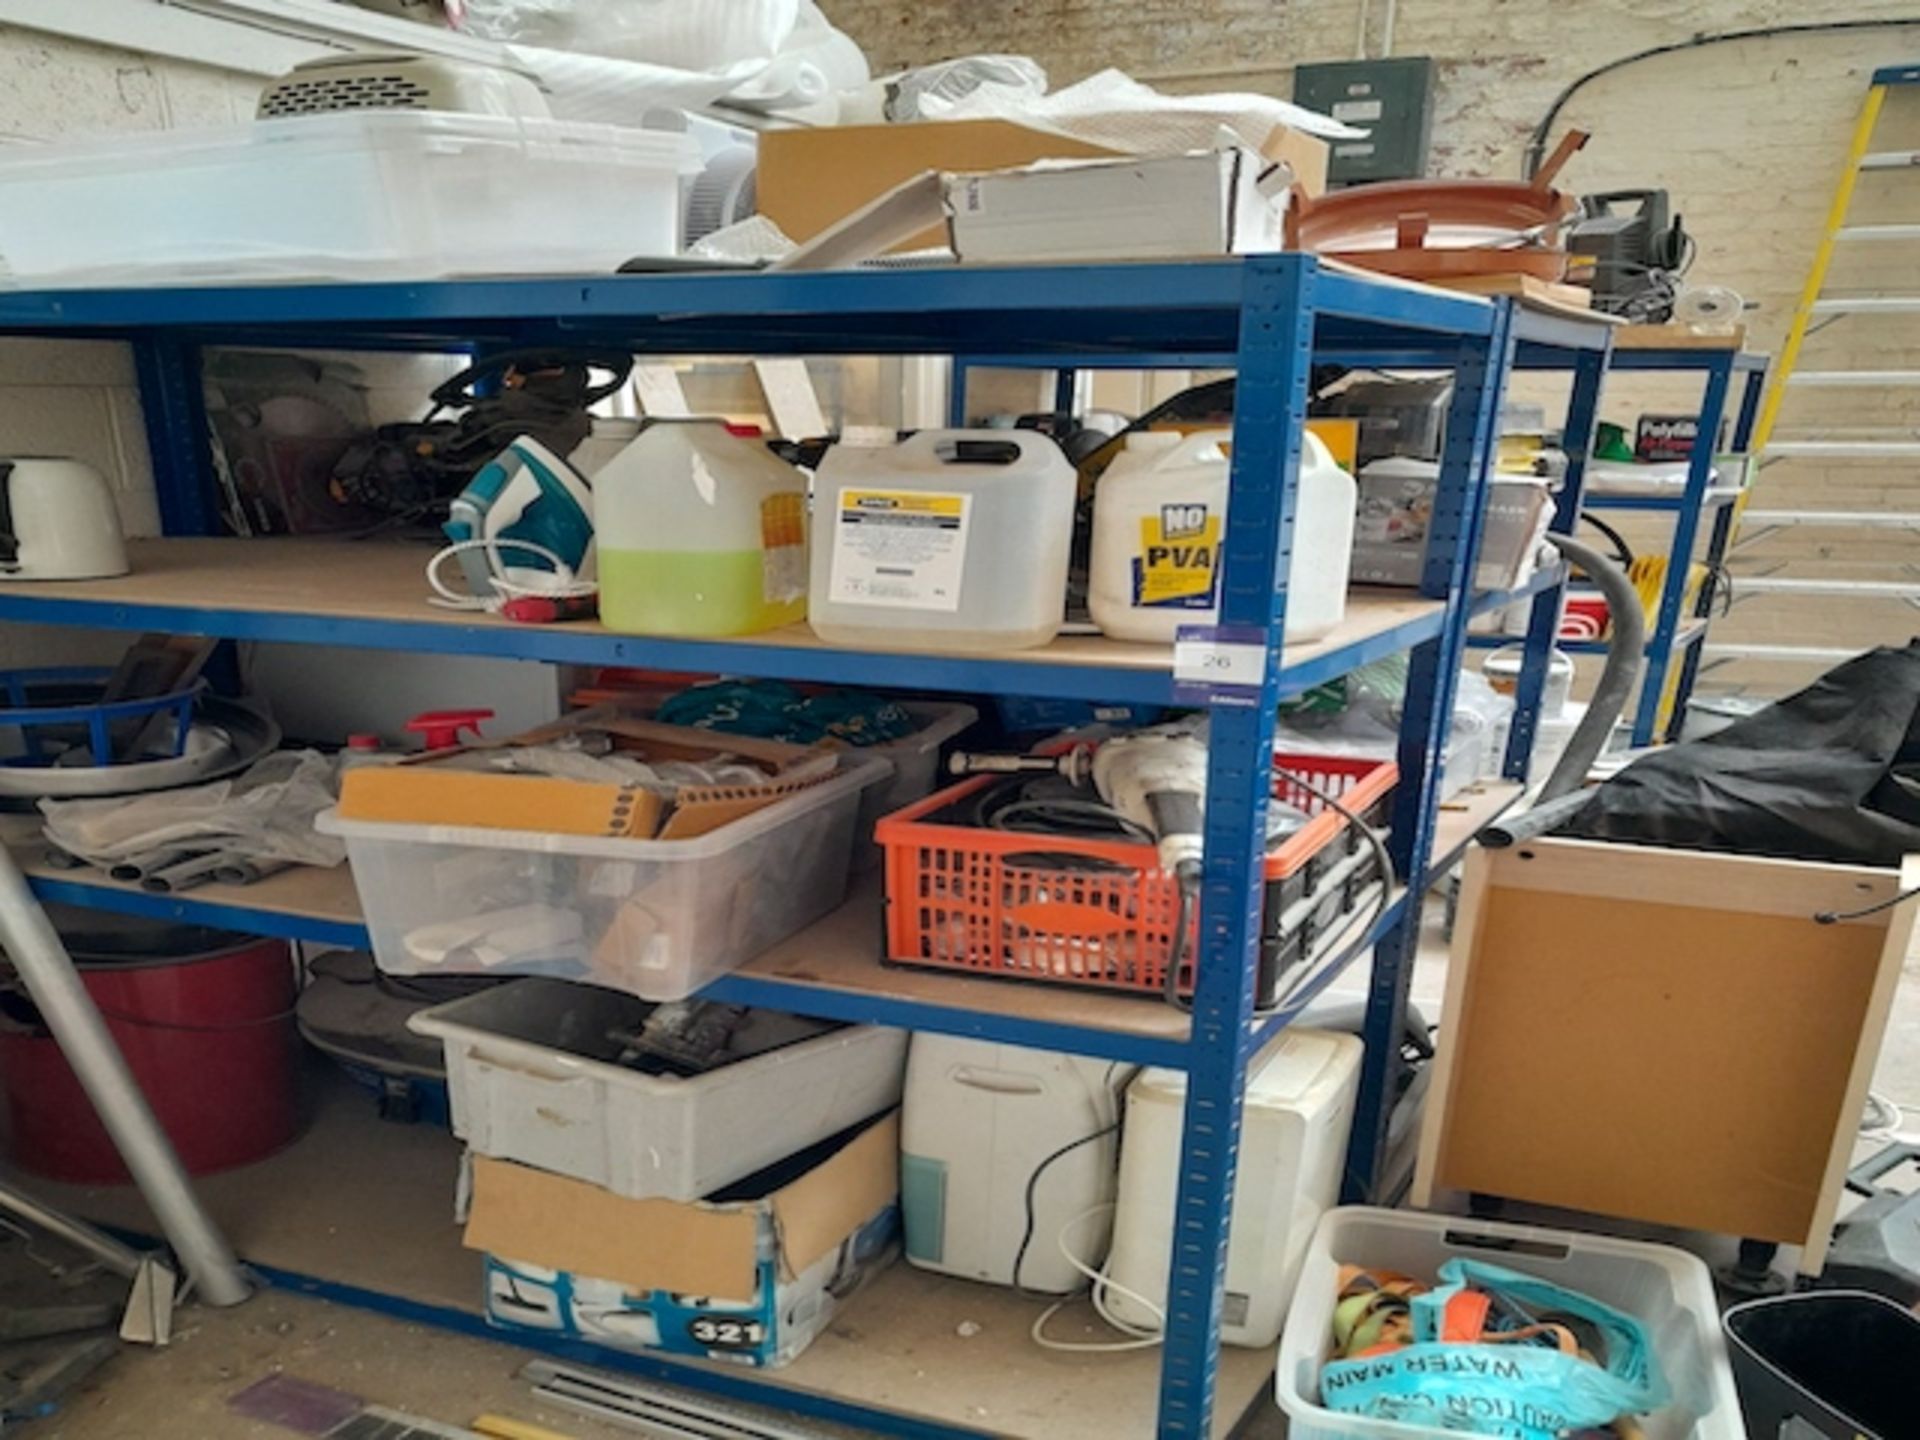 3x 4 shelf shelving units with contents as per pho